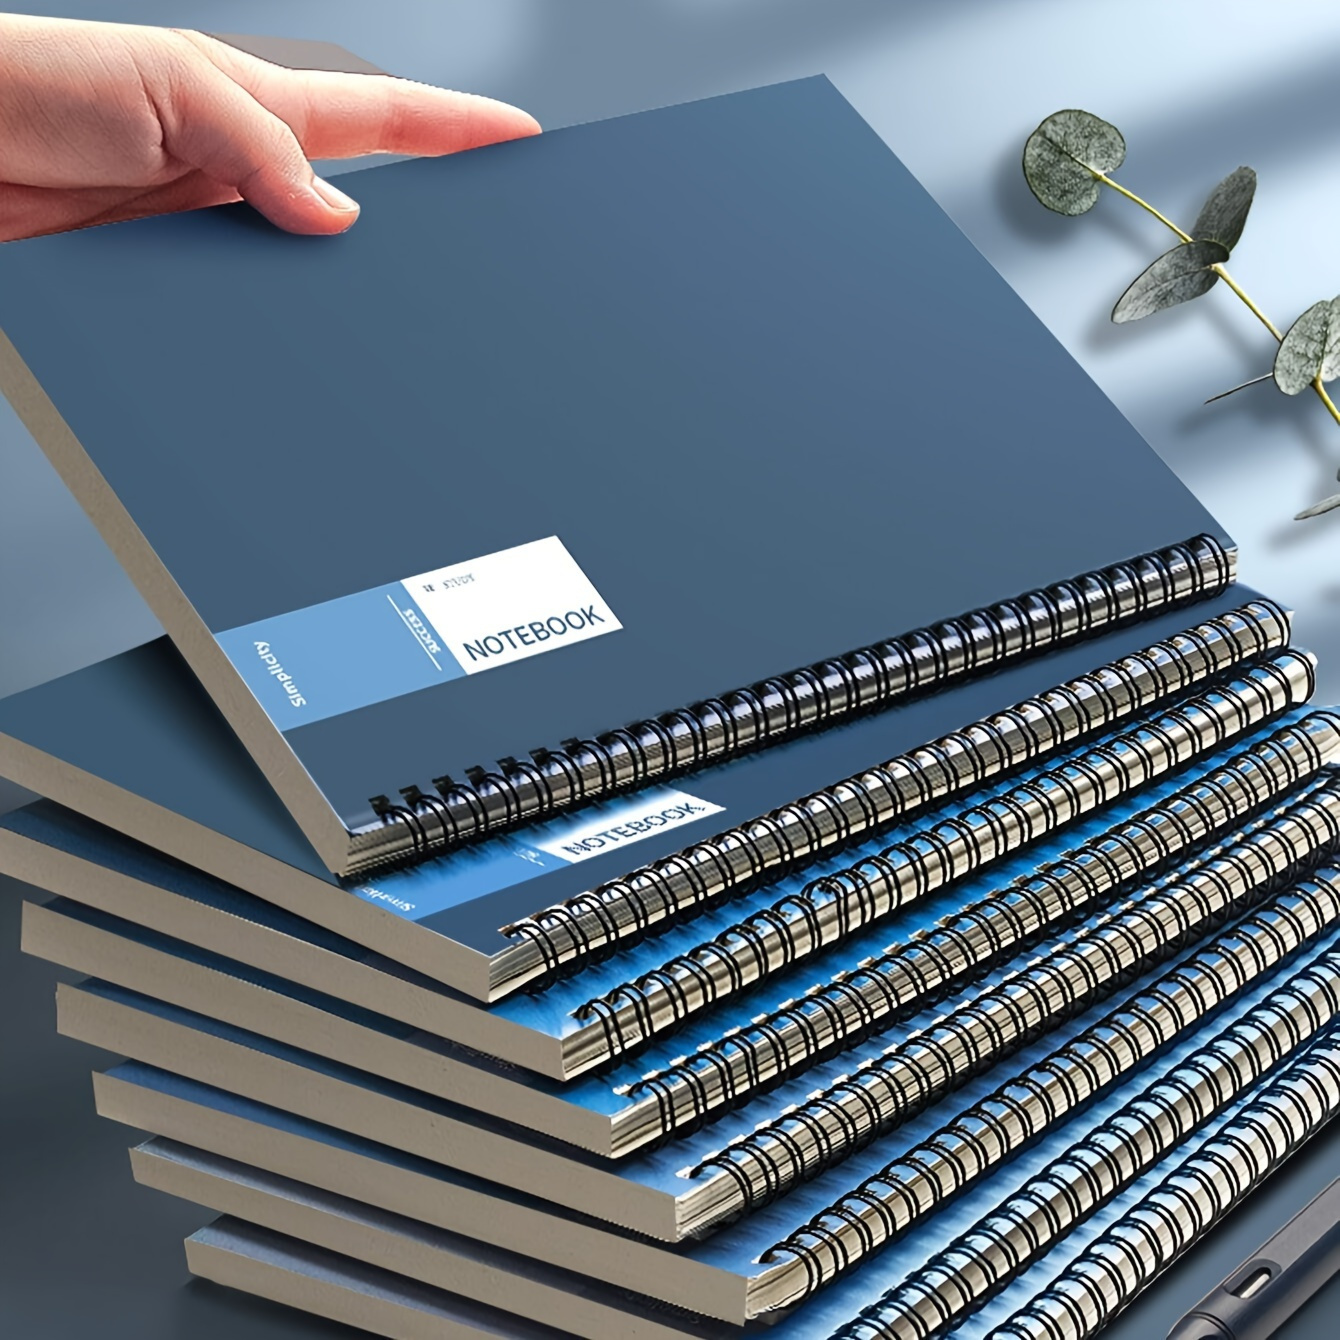 

bulk 320" 3-piece A5 Spiral Notebooks In Gradient Blue - 320 Pages Each, Durable & Versatile For School And Office Use